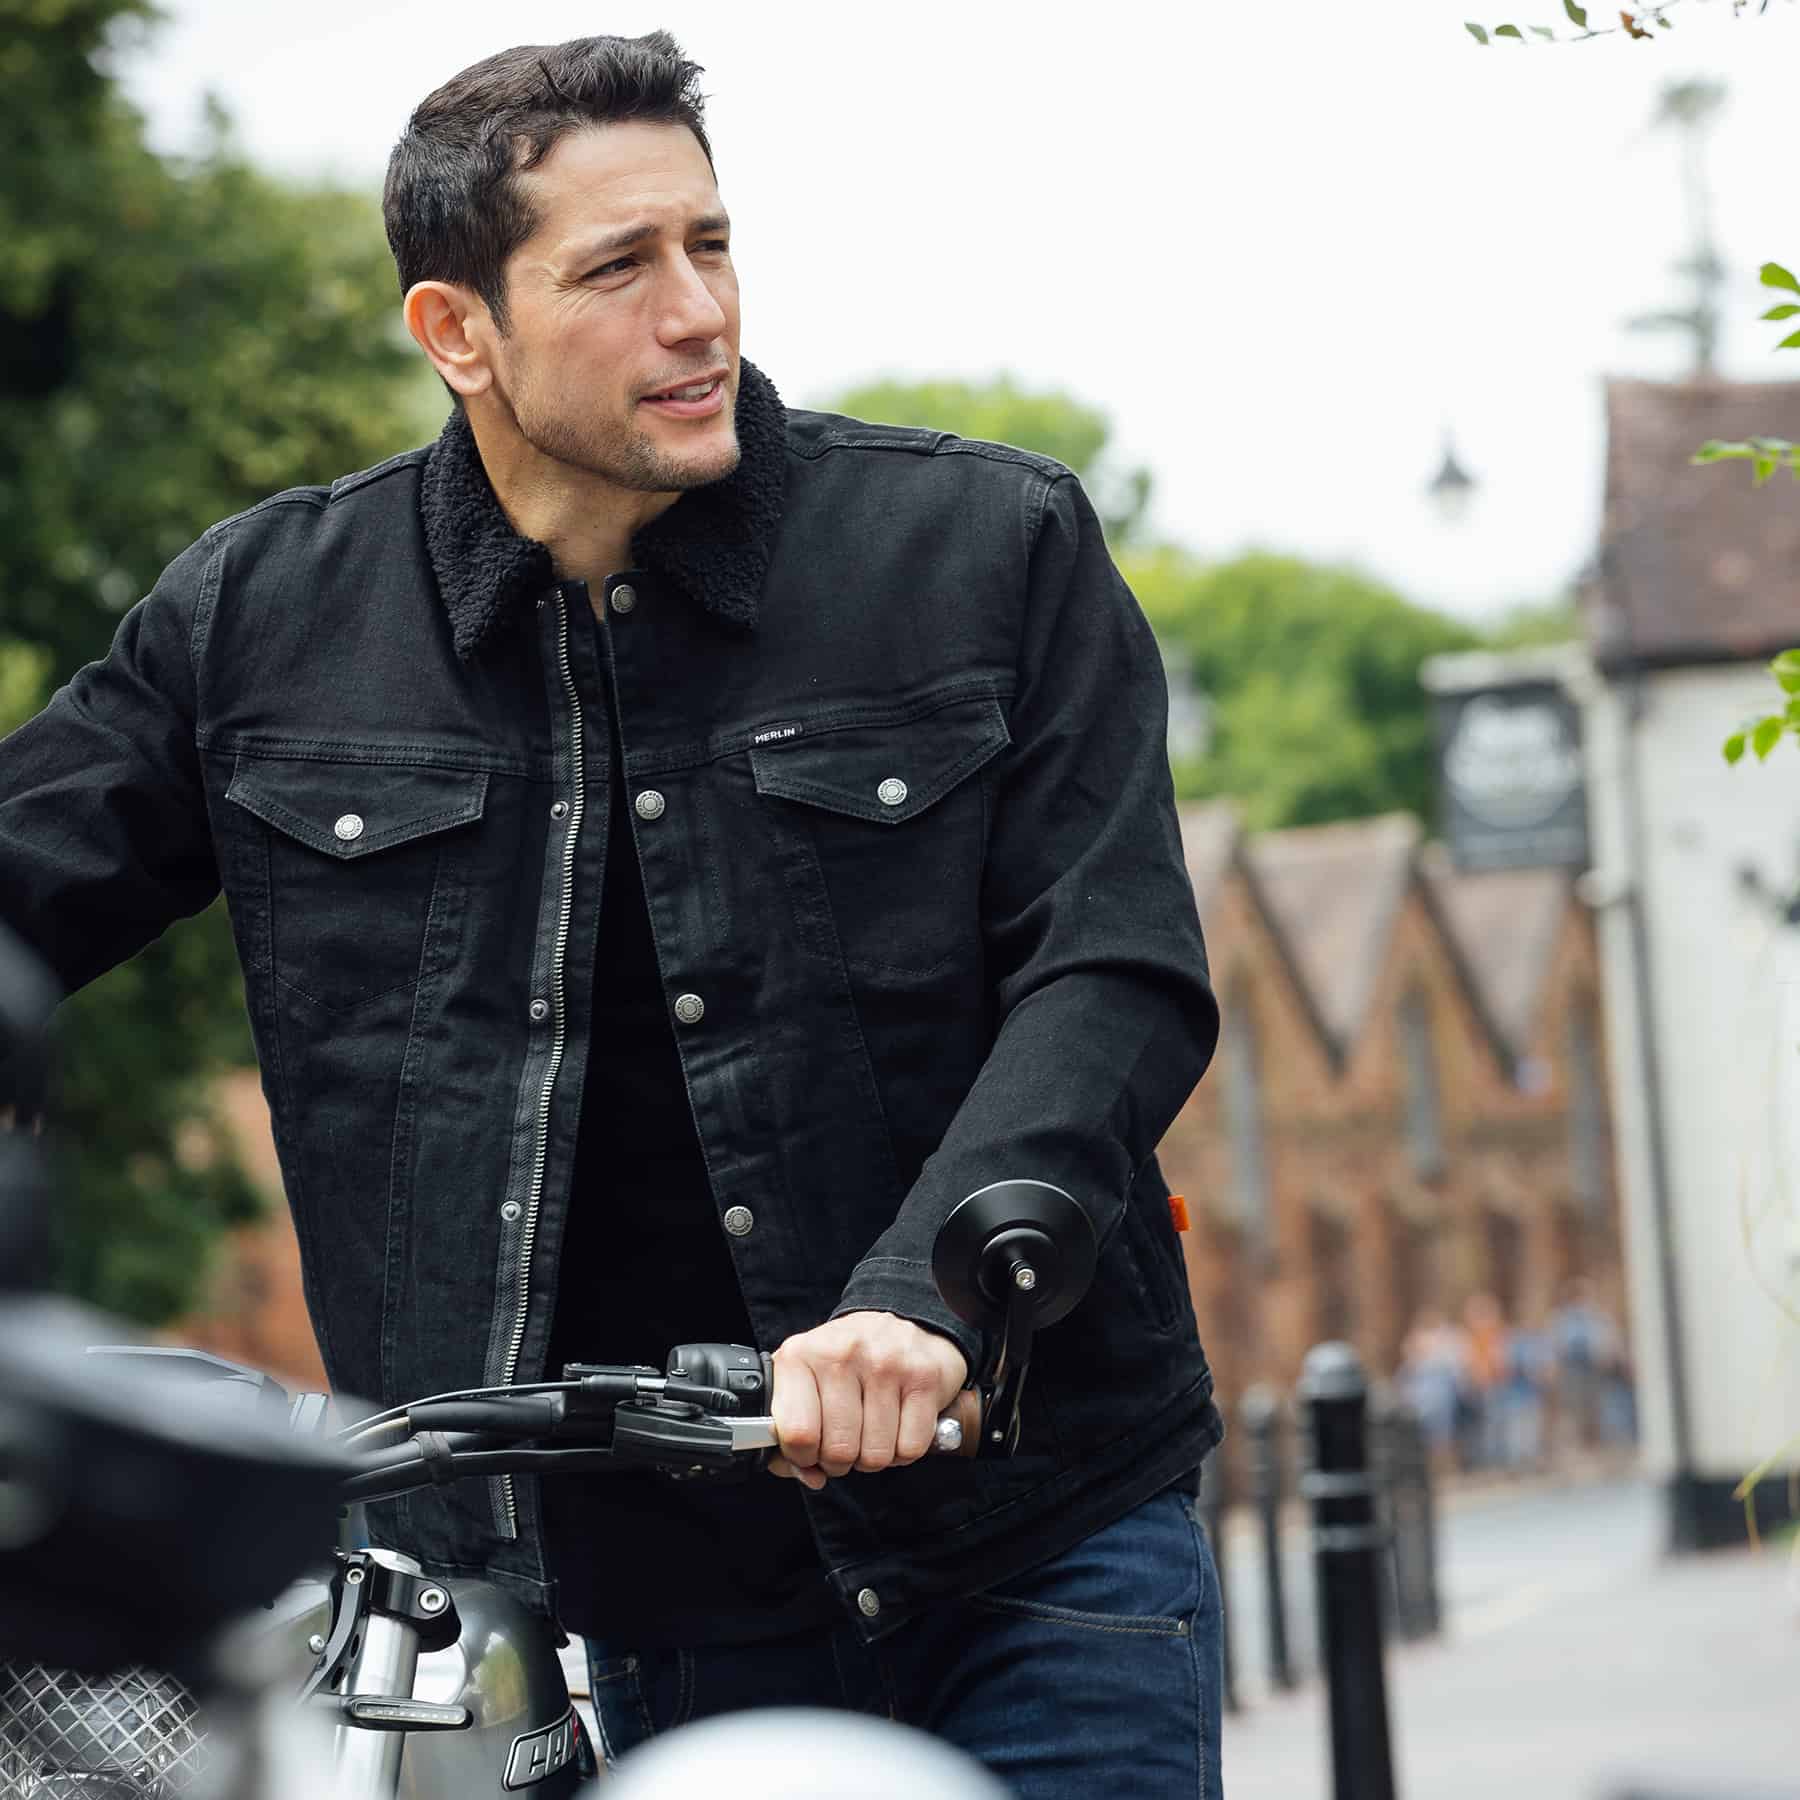 HOW TO CHOOSE THE BEST MOTORCYCLE JACKET FOR HOT WEATHER